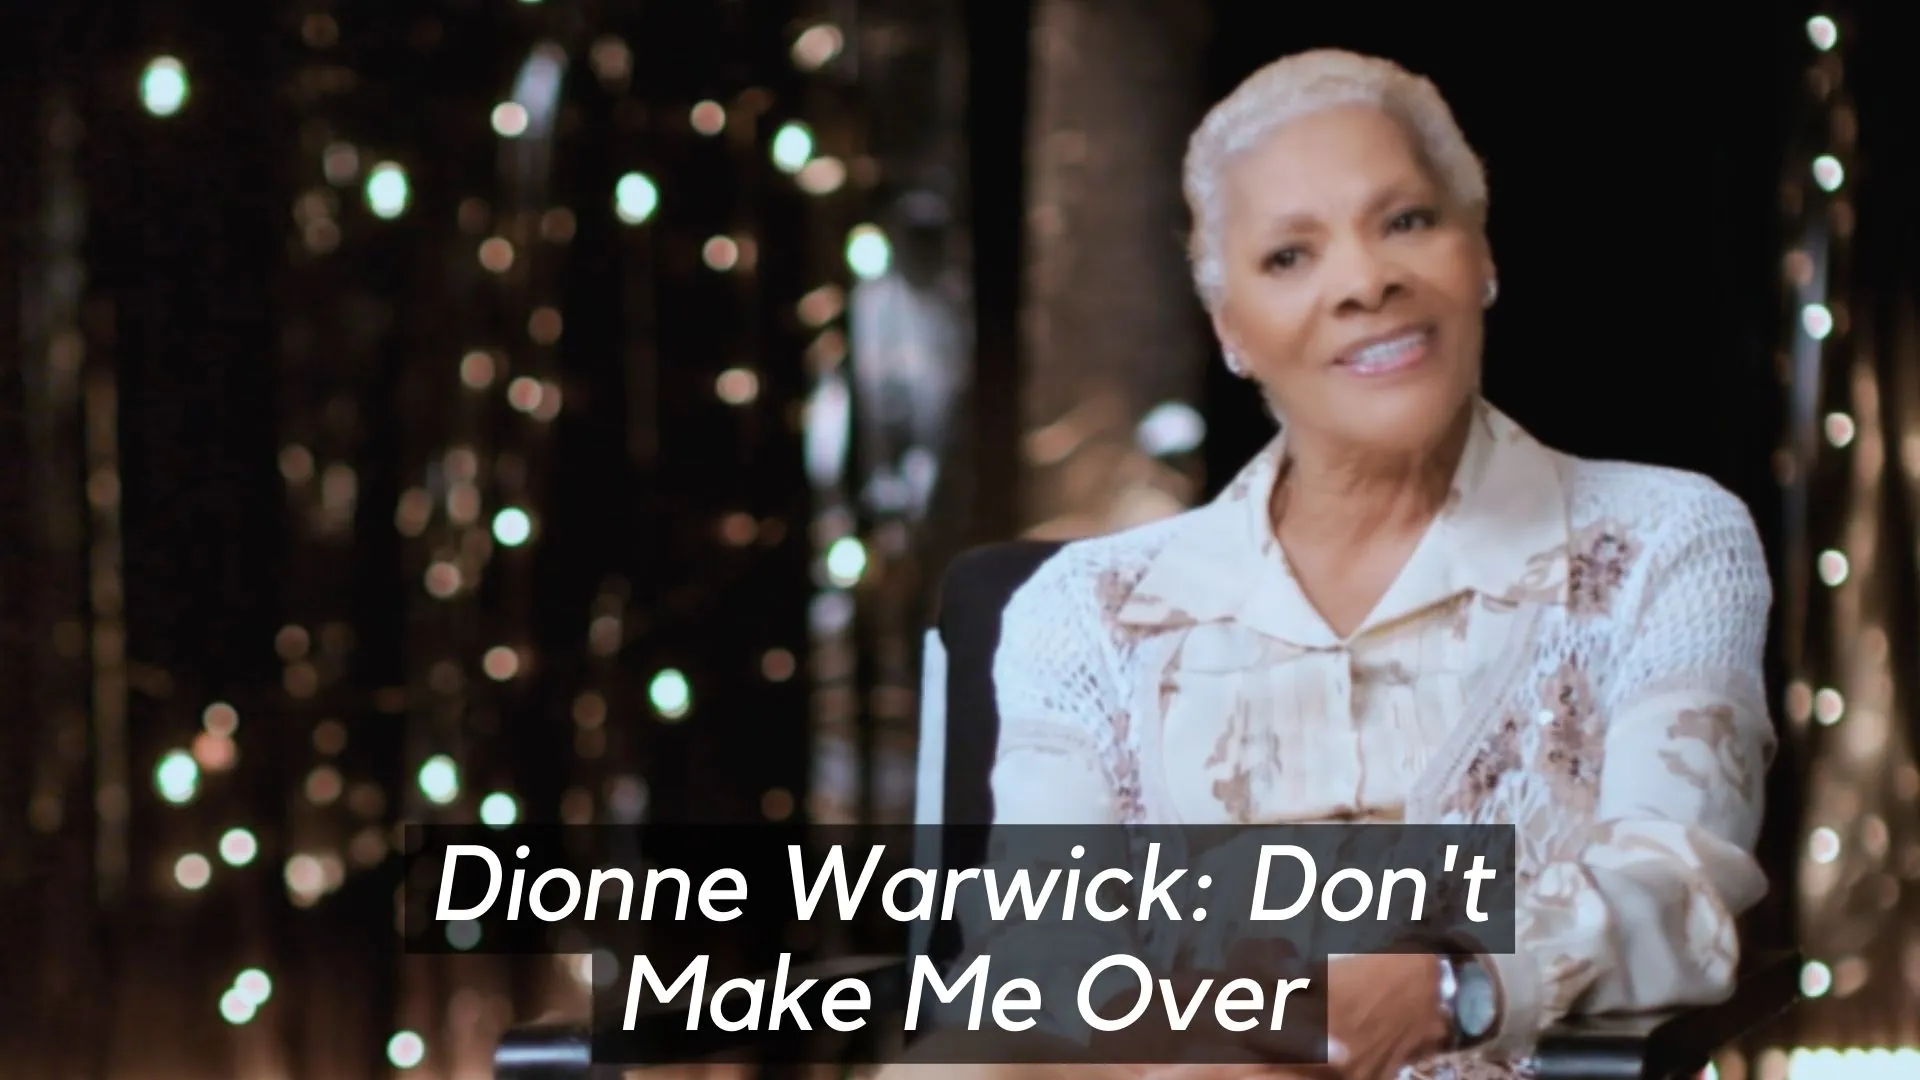 Dionne Warwick: Don't Make Me Over Parents Guide